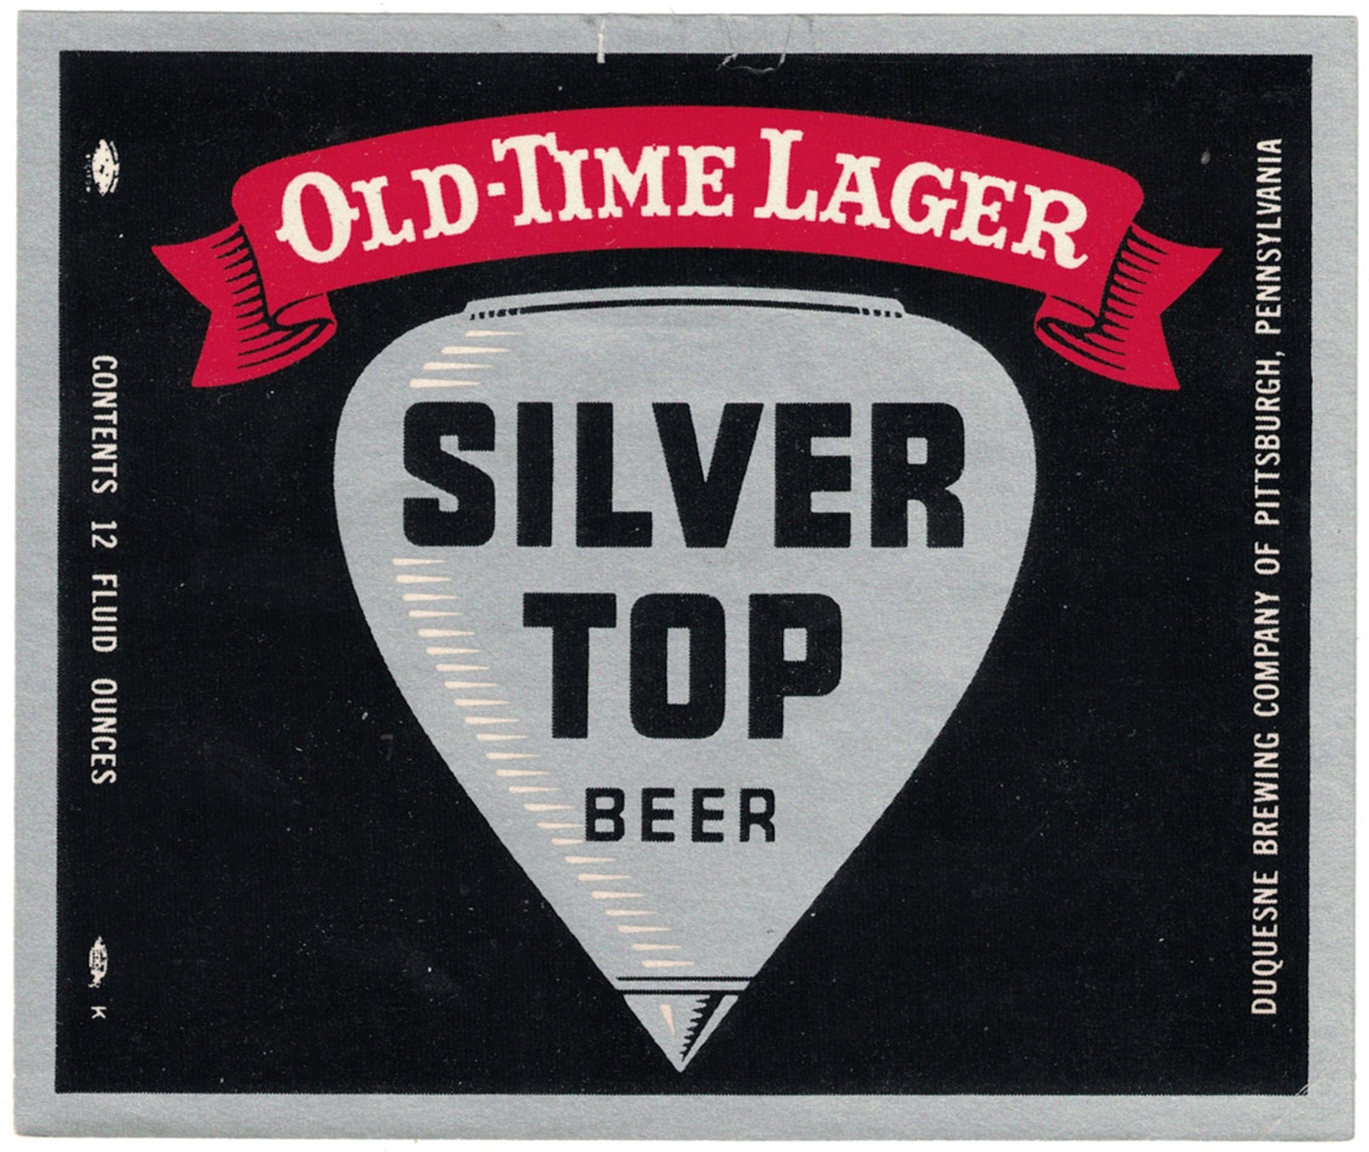 Silver Top Old-Time Lager Beer Label